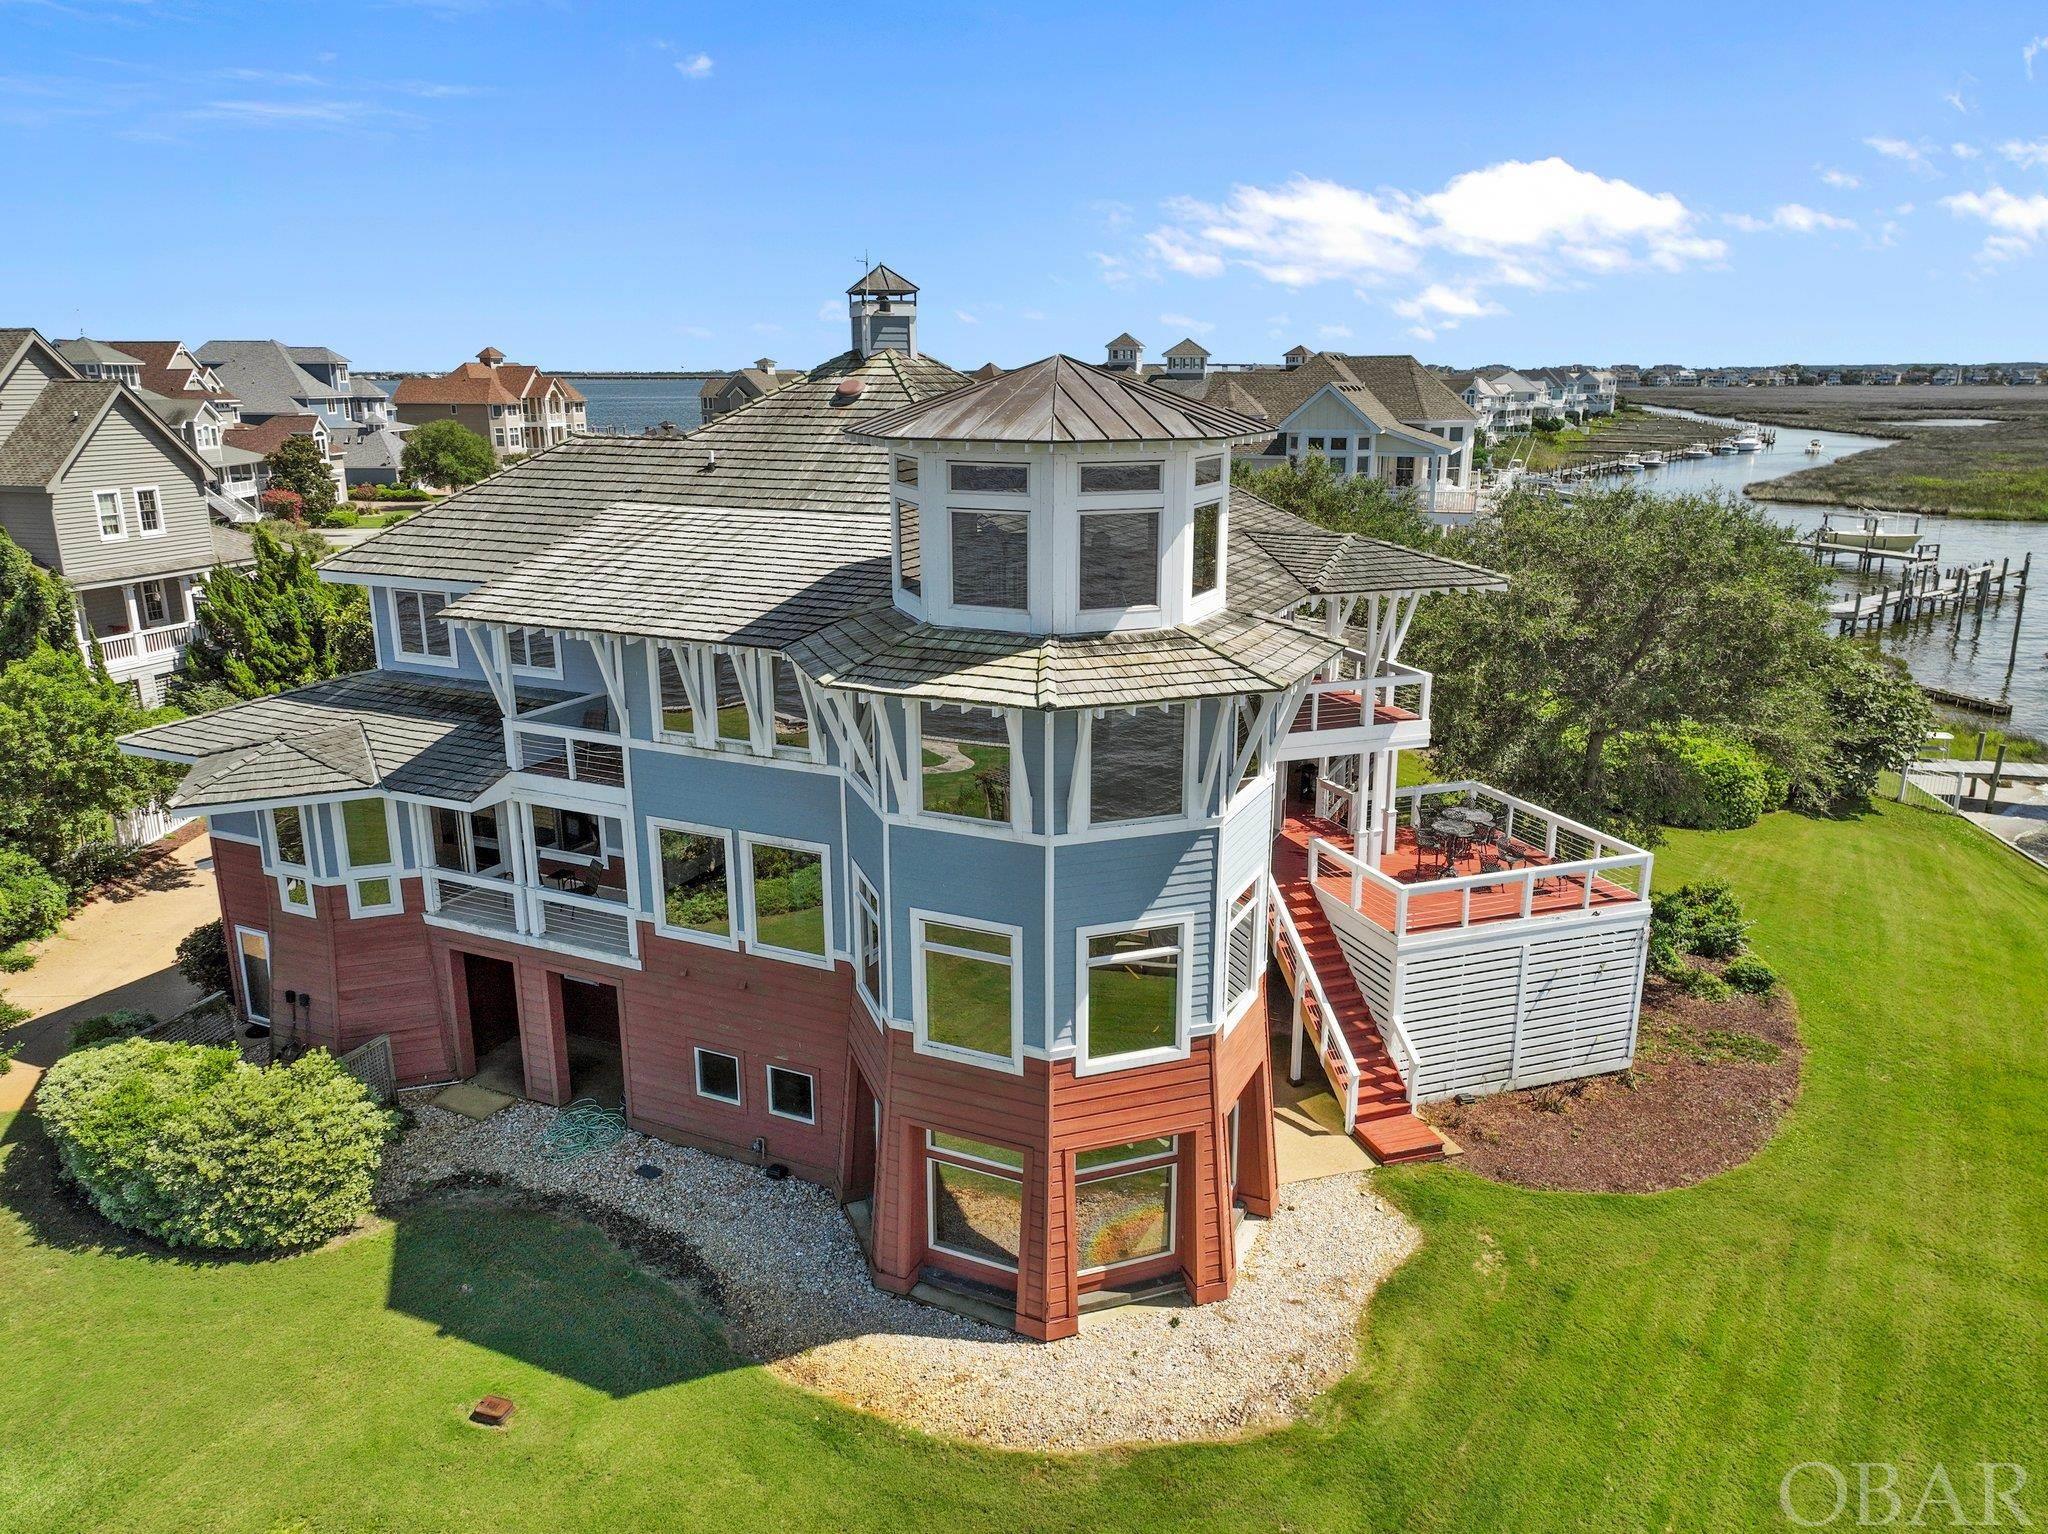 25 Ballast Point Drive, Manteo, NC 27954, 5 Bedrooms Bedrooms, ,4 BathroomsBathrooms,Residential,For Sale,Ballast Point Drive,120140